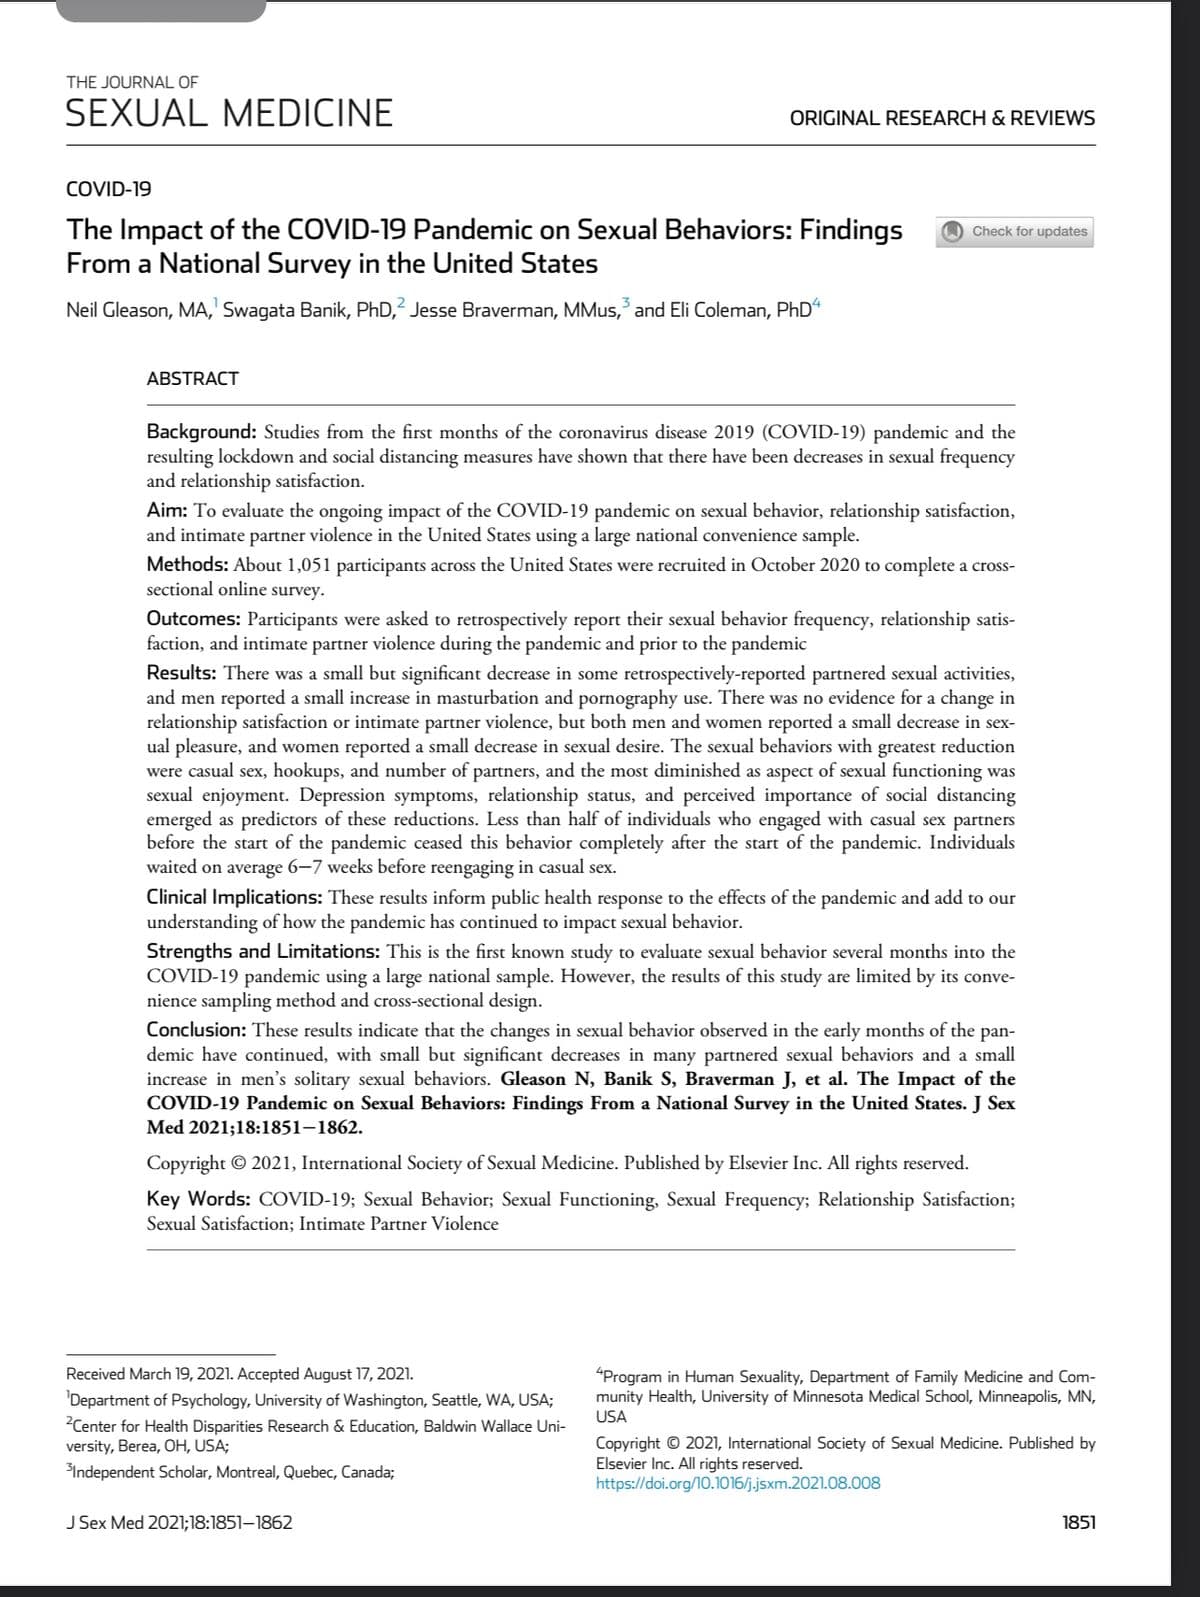 THE JOURNAL OF
SEXUAL MEDICINE
COVID-19
The Impact of the COVID-19 Pandemic on Sexual Behaviors: Findings
From a National Survey in the United States
Neil Gleason, MA,¹ Swagata Banik, PhD,2 Jesse Braverman, MMus, and Eli Coleman, PhD4
ABSTRACT
ORIGINAL RESEARCH & REVIEWS
disease 2019 (COVID-1
pandemic and the
Background: Studies from the first months of the cor
resulting lockdown and social distancing measures have shown that there have been decreases in sexual frequency
and relationship satisfaction.
Check for updates
Aim: To evaluate the ongoing impact of the COVID-19 pandemic on sexual behavior, relationship satisfaction,
and intimate partner violence in the United States using a large national convenience sample.
Methods: About 1,051 participants across the United States were recruited in October 2020 to complete a cross-
sectional online survey.
Outcomes: Participants were asked to retrospectively report their sexual behavior frequency, relationship satis-
faction, and intimate partner violence during the pandemic and prior to the pandemic
Results: There was a small but significant decrease in some retrospectively-reported partnered sexual activities,
and men reported a small increase in masturbation and pornography use. There was no evidence for a change in
relationship satisfaction or intimate partner violence, but both men and women reported a small decrease in sex-
ual pleasure, and women reported a small decrease in sexual desire. The sexual behaviors with greatest reduction
were casual sex, hookups, and number of partners, and the most diminished as aspect of sexual functioning was
sexual enjoyment. Depression symptoms, relationship status, and perceived importance of social distancing
emerged as predictors of these reductions. Less than half of individuals who engaged with casual sex partners
before the start of the pandemic ceased this behavior completely after the start of the pandemic. Individuals
waited on average 6-7 weeks before reengaging in casual sex.
Clinical Implications: These results inform public health response to the effects of the pandemic and add to our
understanding of how the pandemic has continued to impact sexual behavior.
Strengths and Limitations: This is the first known study to evaluate sexual behavior several months into the
COVID-19 pandemic using a large national sample. However, the results of this study are limited by its conve-
nience sampling method and cross-sectional design.
Conclusion: These results indicate that the changes in sexual behavior observed in the early months of the pan-
demic have continued, with small but significant decreases in many partnered sexual behaviors and a small
increase in men's solitary sexual behaviors. Gleason N, Banik S, Braverman J, et al. The Impact of the
COVID-19 Pandemic on Sexual Behaviors: Findings From a National Survey in the United States. J Sex
Med 2021;18:1851-1862.
Received March 19, 2021. Accepted August 17, 2021.
Department of Psychology, University of Washington, Seattle, WA, USA;
²Center for Health Disparities Research & Education, Baldwin Wallace Uni-
versity, Berea, OH, USA;
³Independent Scholar, Montreal, Quebec, Canada;
Copyright © 2021, International Society of Sexual Medicine. Published by Elsevier Inc. All rights reserved.
Key Words: COVID-19; Sexual Behavior; Sexual Functioning, Sexual Frequency; Relationship Satisfaction;
Sexual Satisfaction; Intimate Partner Violence
J Sex Med 2021;18:1851-1862
4Program in Human Sexuality, Department of Family Medicine and Com-
munity Health, University of Minnesota Medical School, Minneapolis, MN,
USA
Copyright © 2021, International Society of Sexual Medicine. Published by
Elsevier Inc. All rights reserved.
https://doi.org/10.1016/j.jsxm.2021.08.008
1851